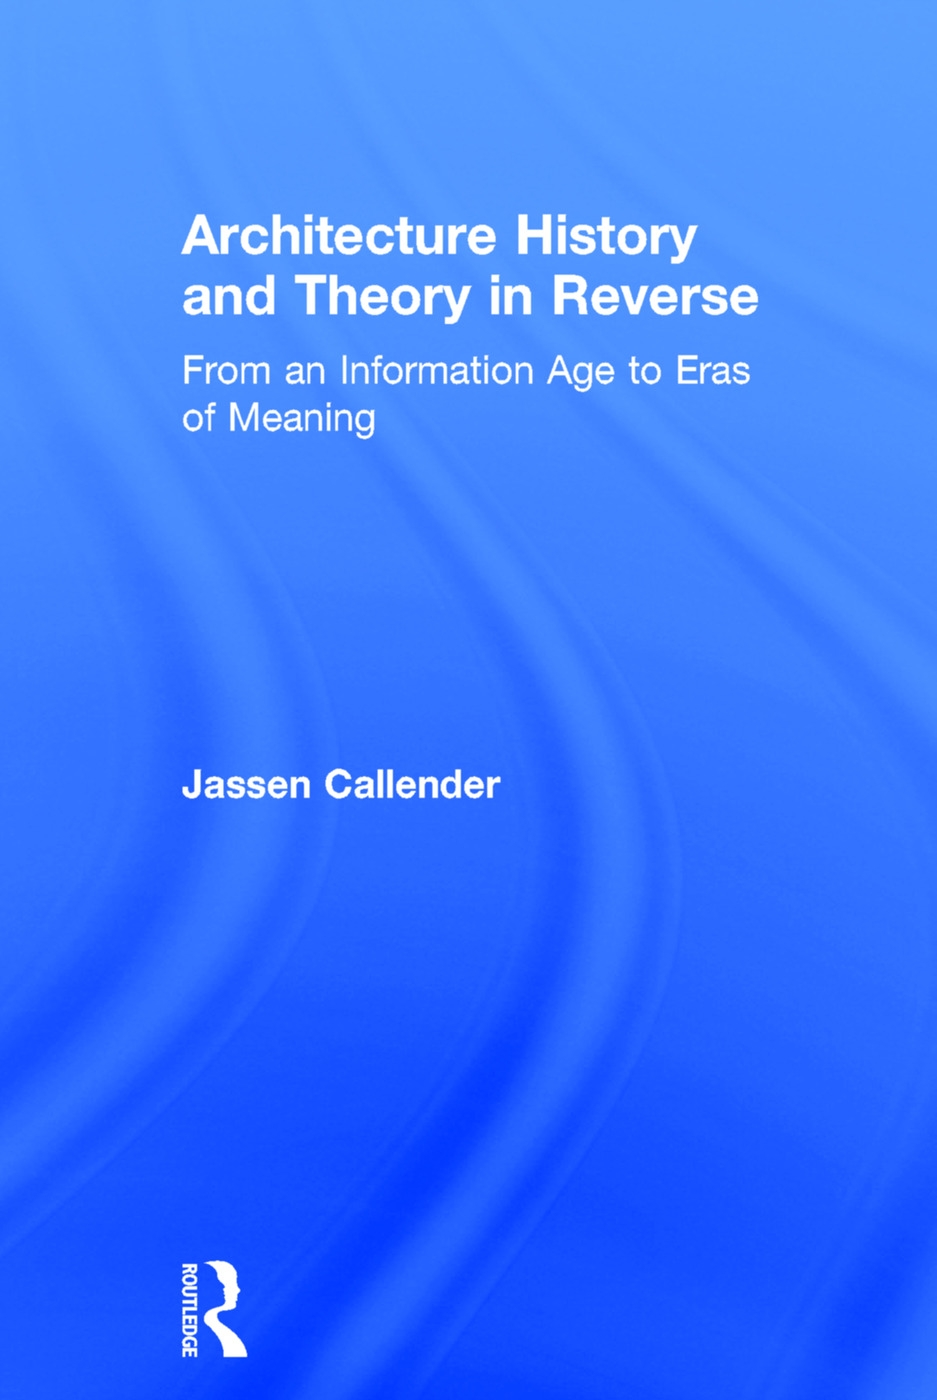 Architecture History and Theory in Reverse: From an Information Age to Eras of Meaning